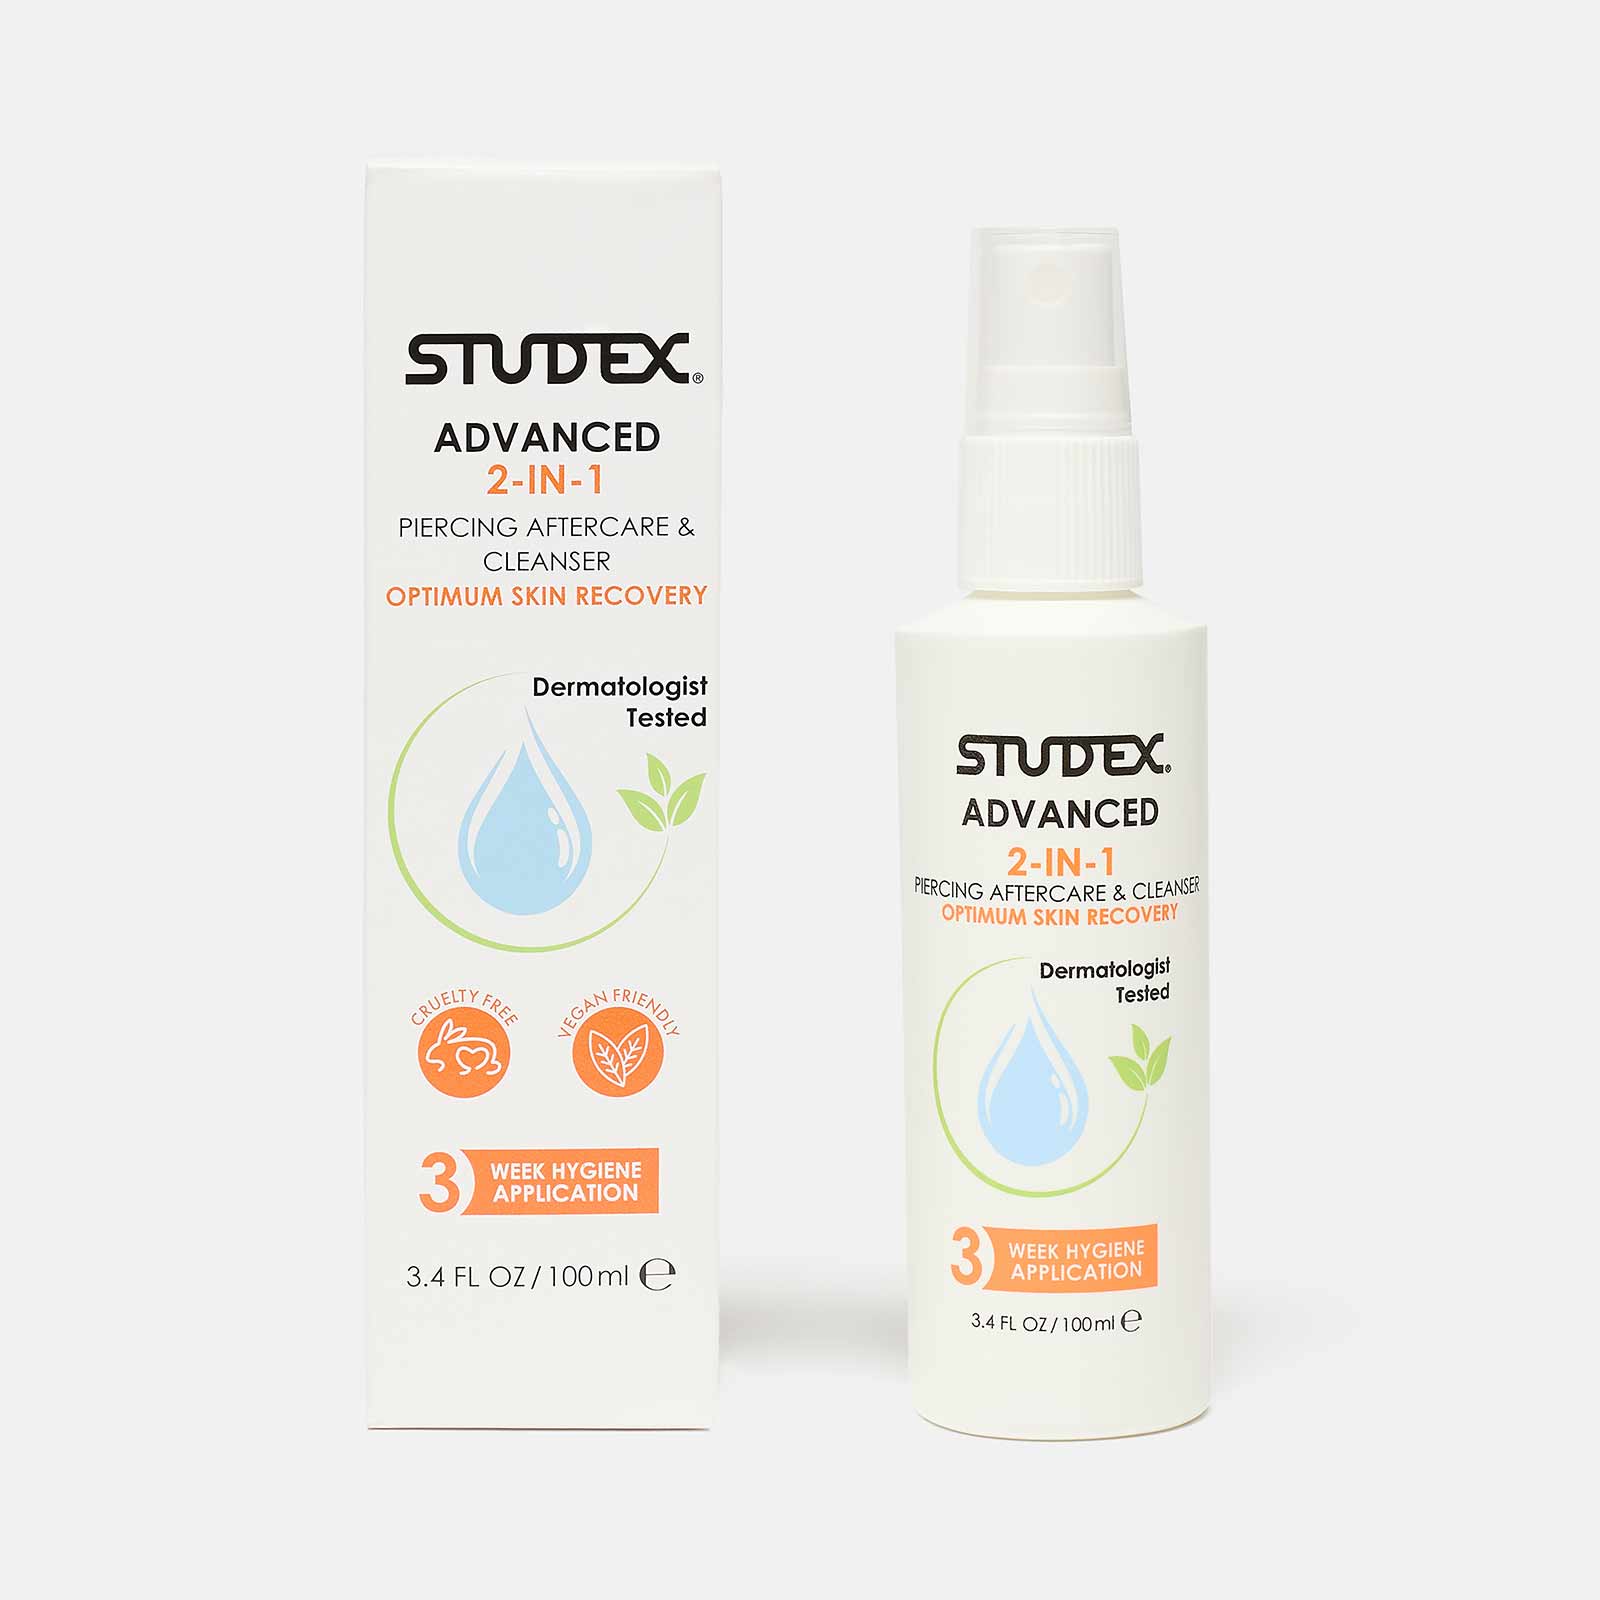 Studex Advanced – Aftercare & Cleanser